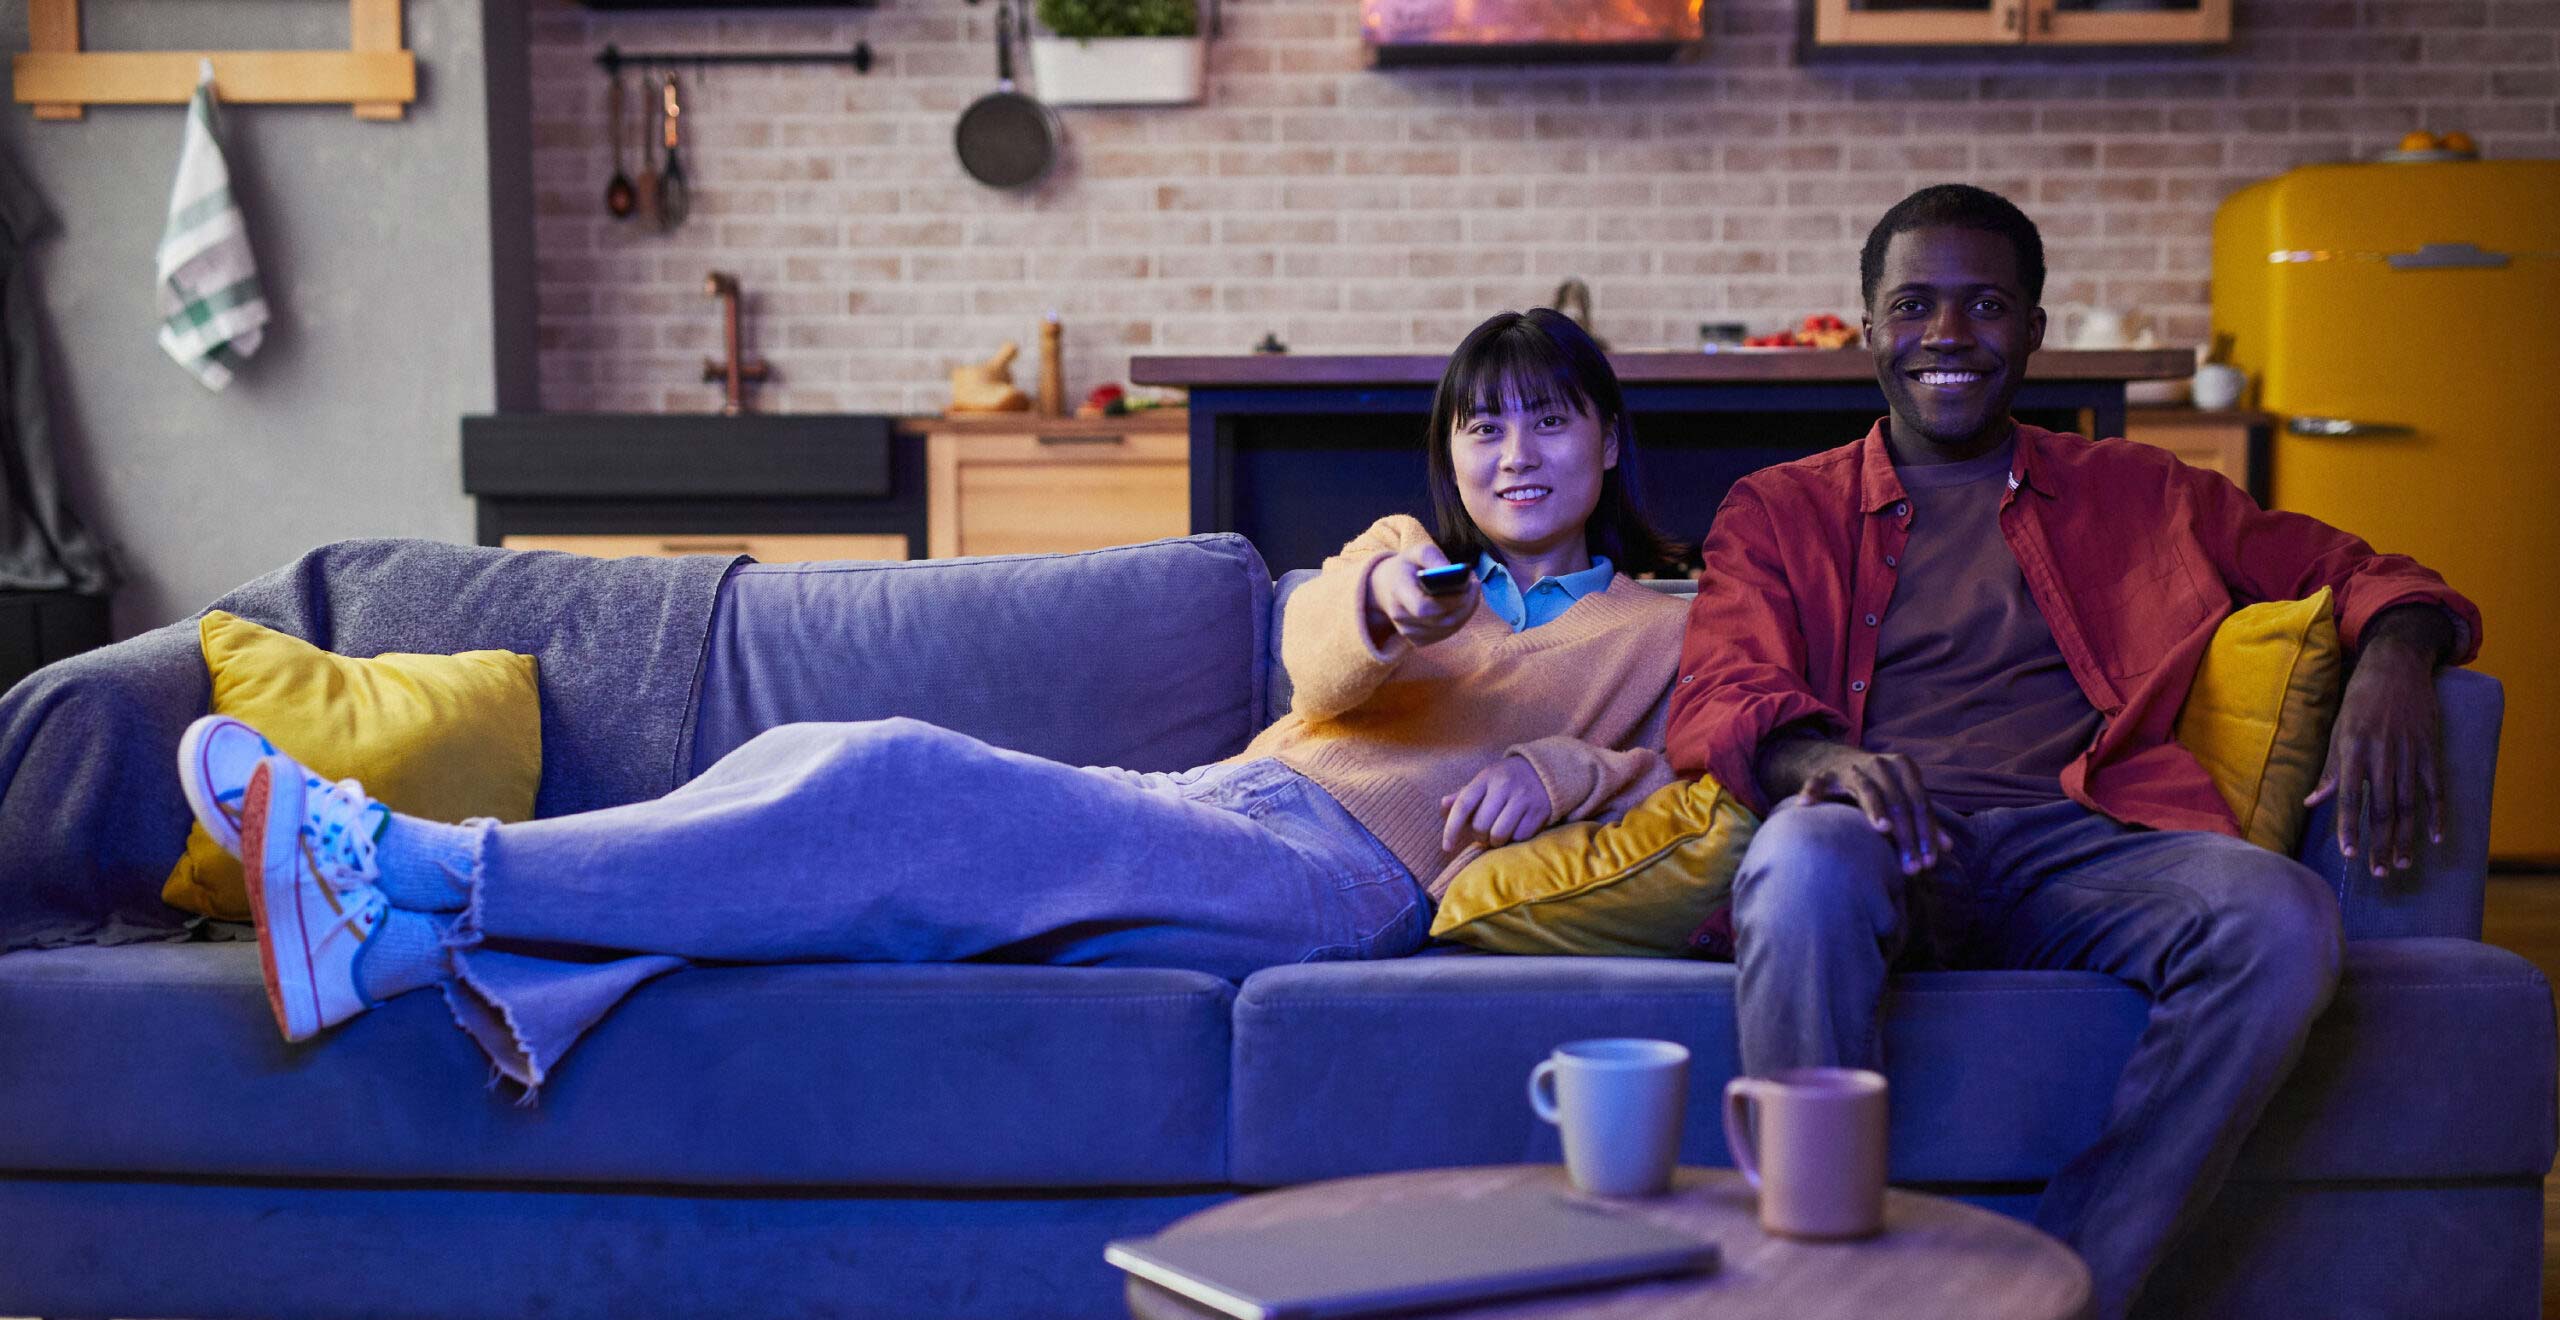 A young man and woman relax on a couch enjoying television.